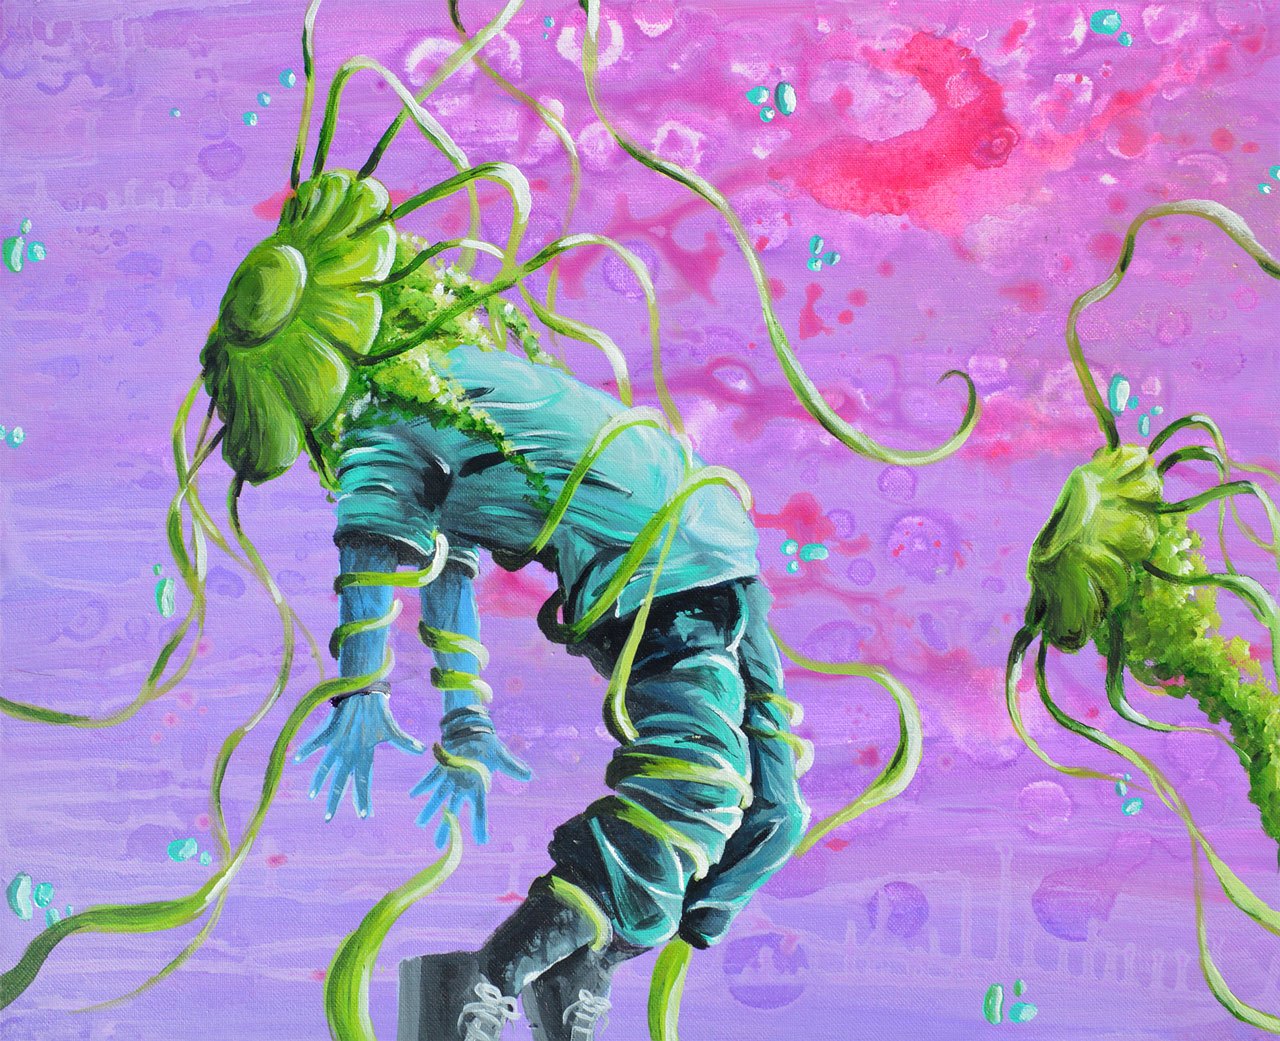 [Artwork by Matias features a floating human-like being wrapped in smooth green tentavles coming from what look like underwater creatures, against a fluid pink and purple backdrop.]